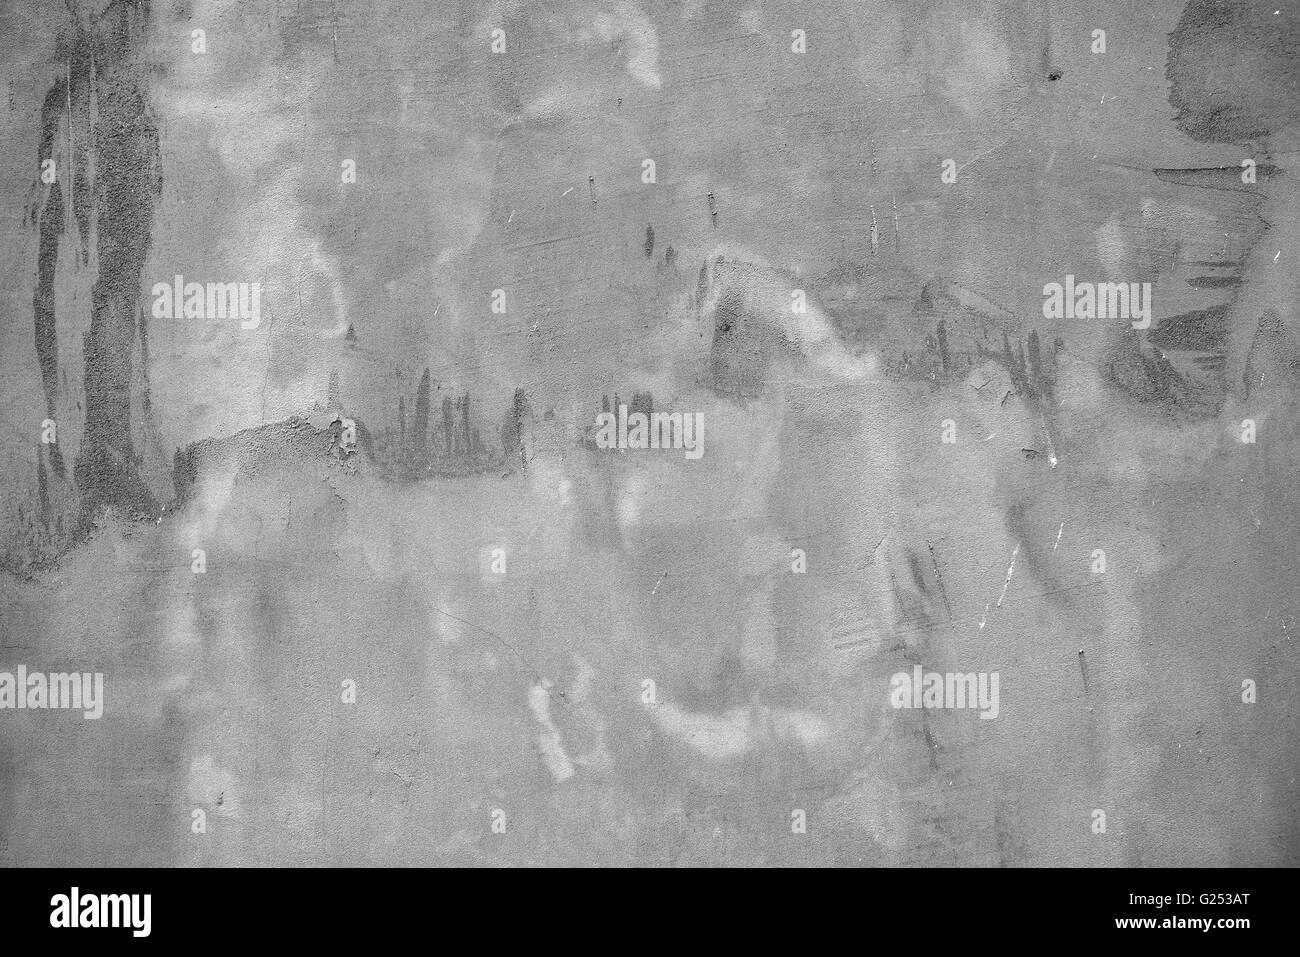 Cement concrete wall texture, gray grunge background Stock Photo